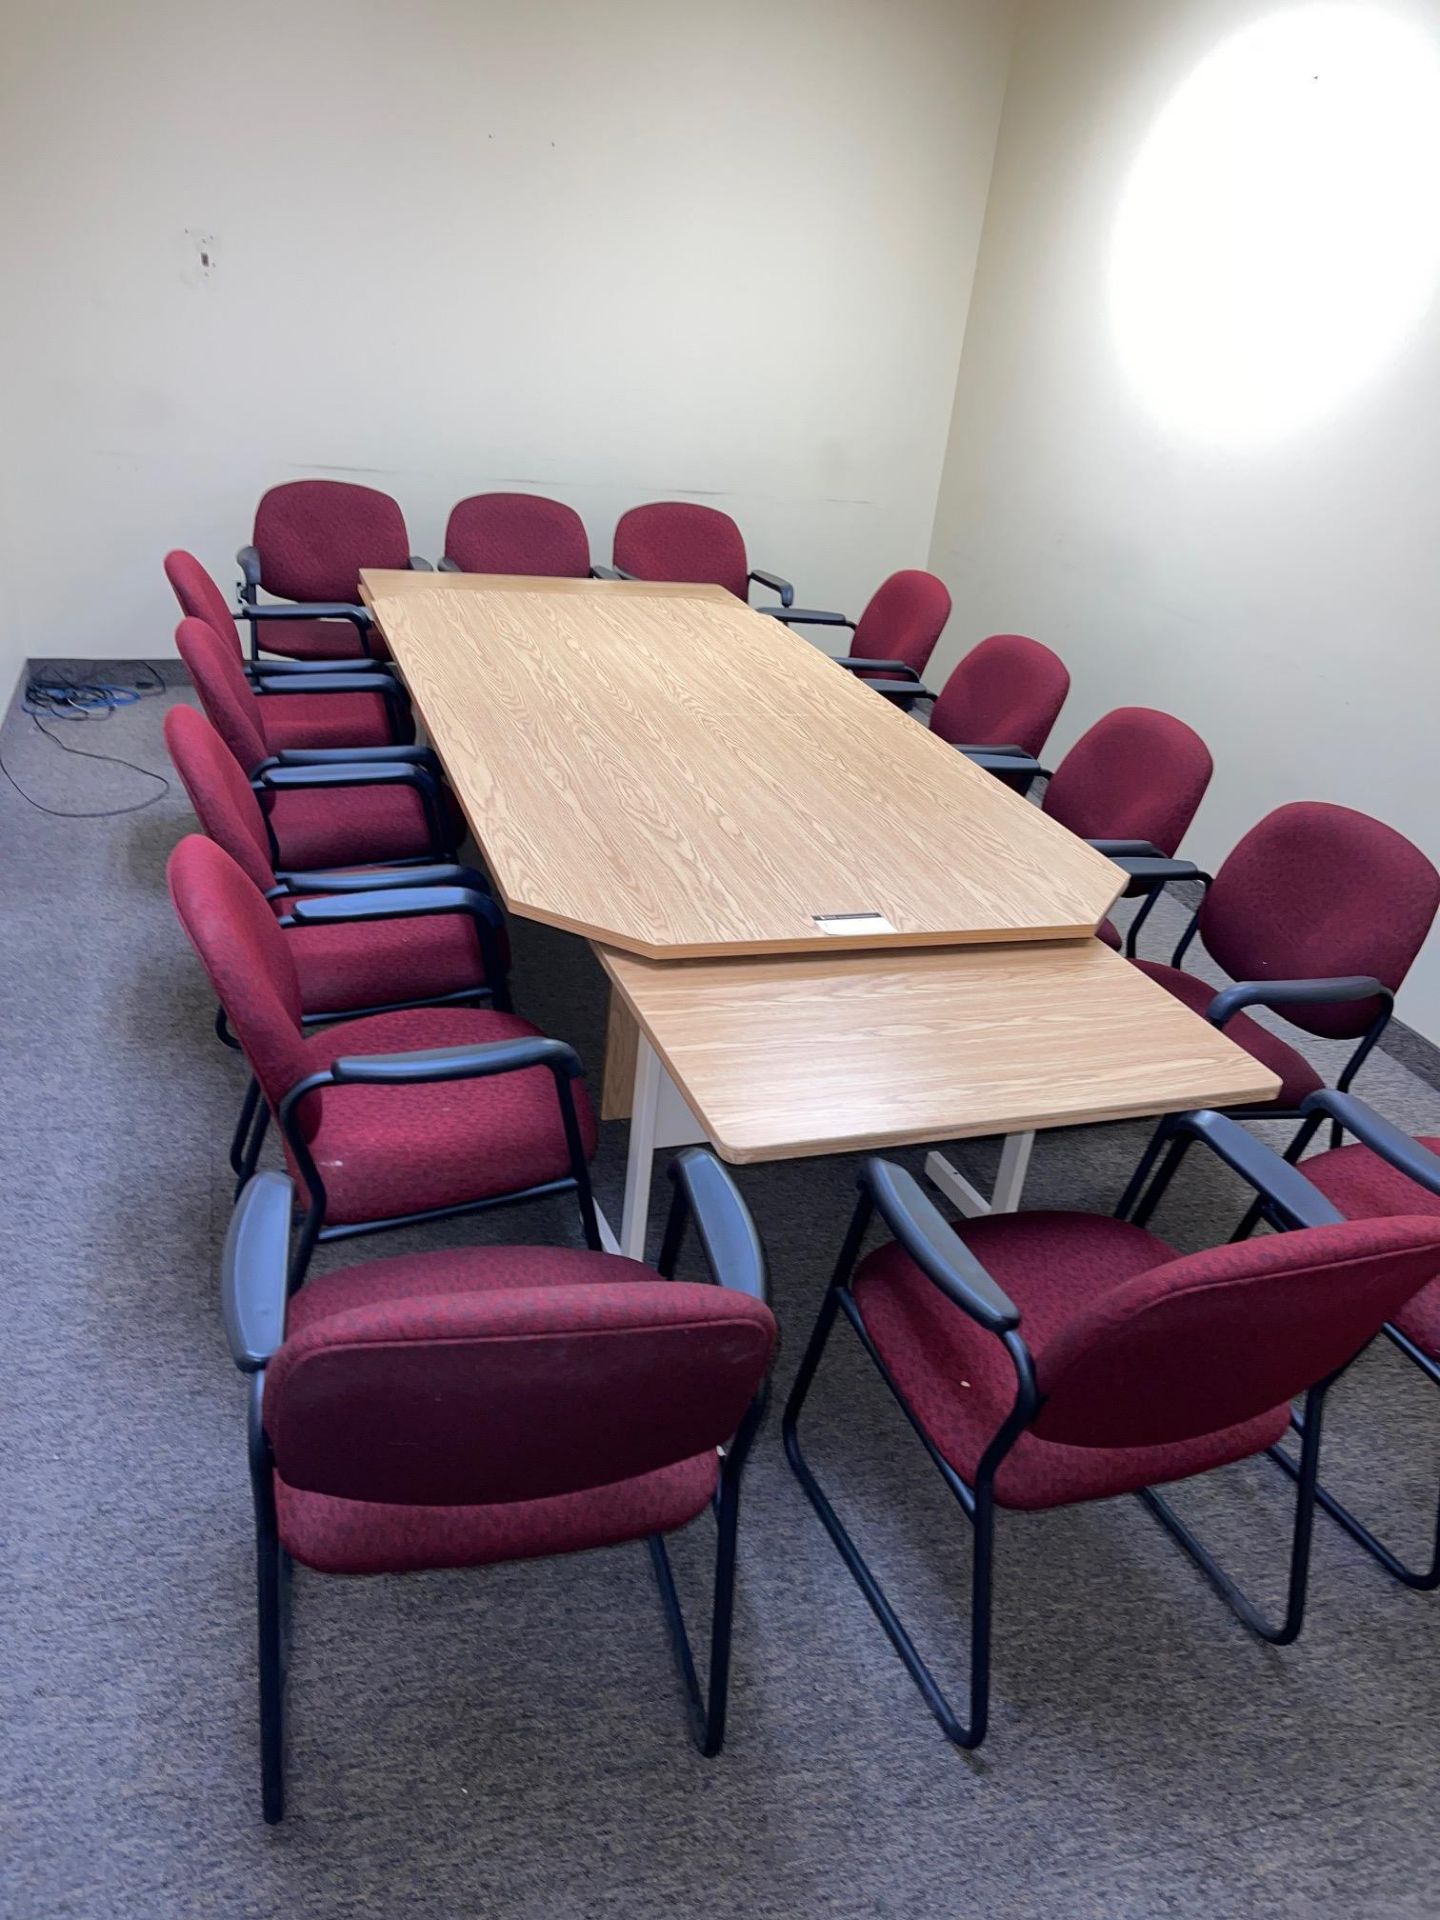 LOT/ 8' LONG TABLE WITH (2) END DESKS, (14) RED SLED BASE ARM CHAIRS, (3) WALL BOARDS